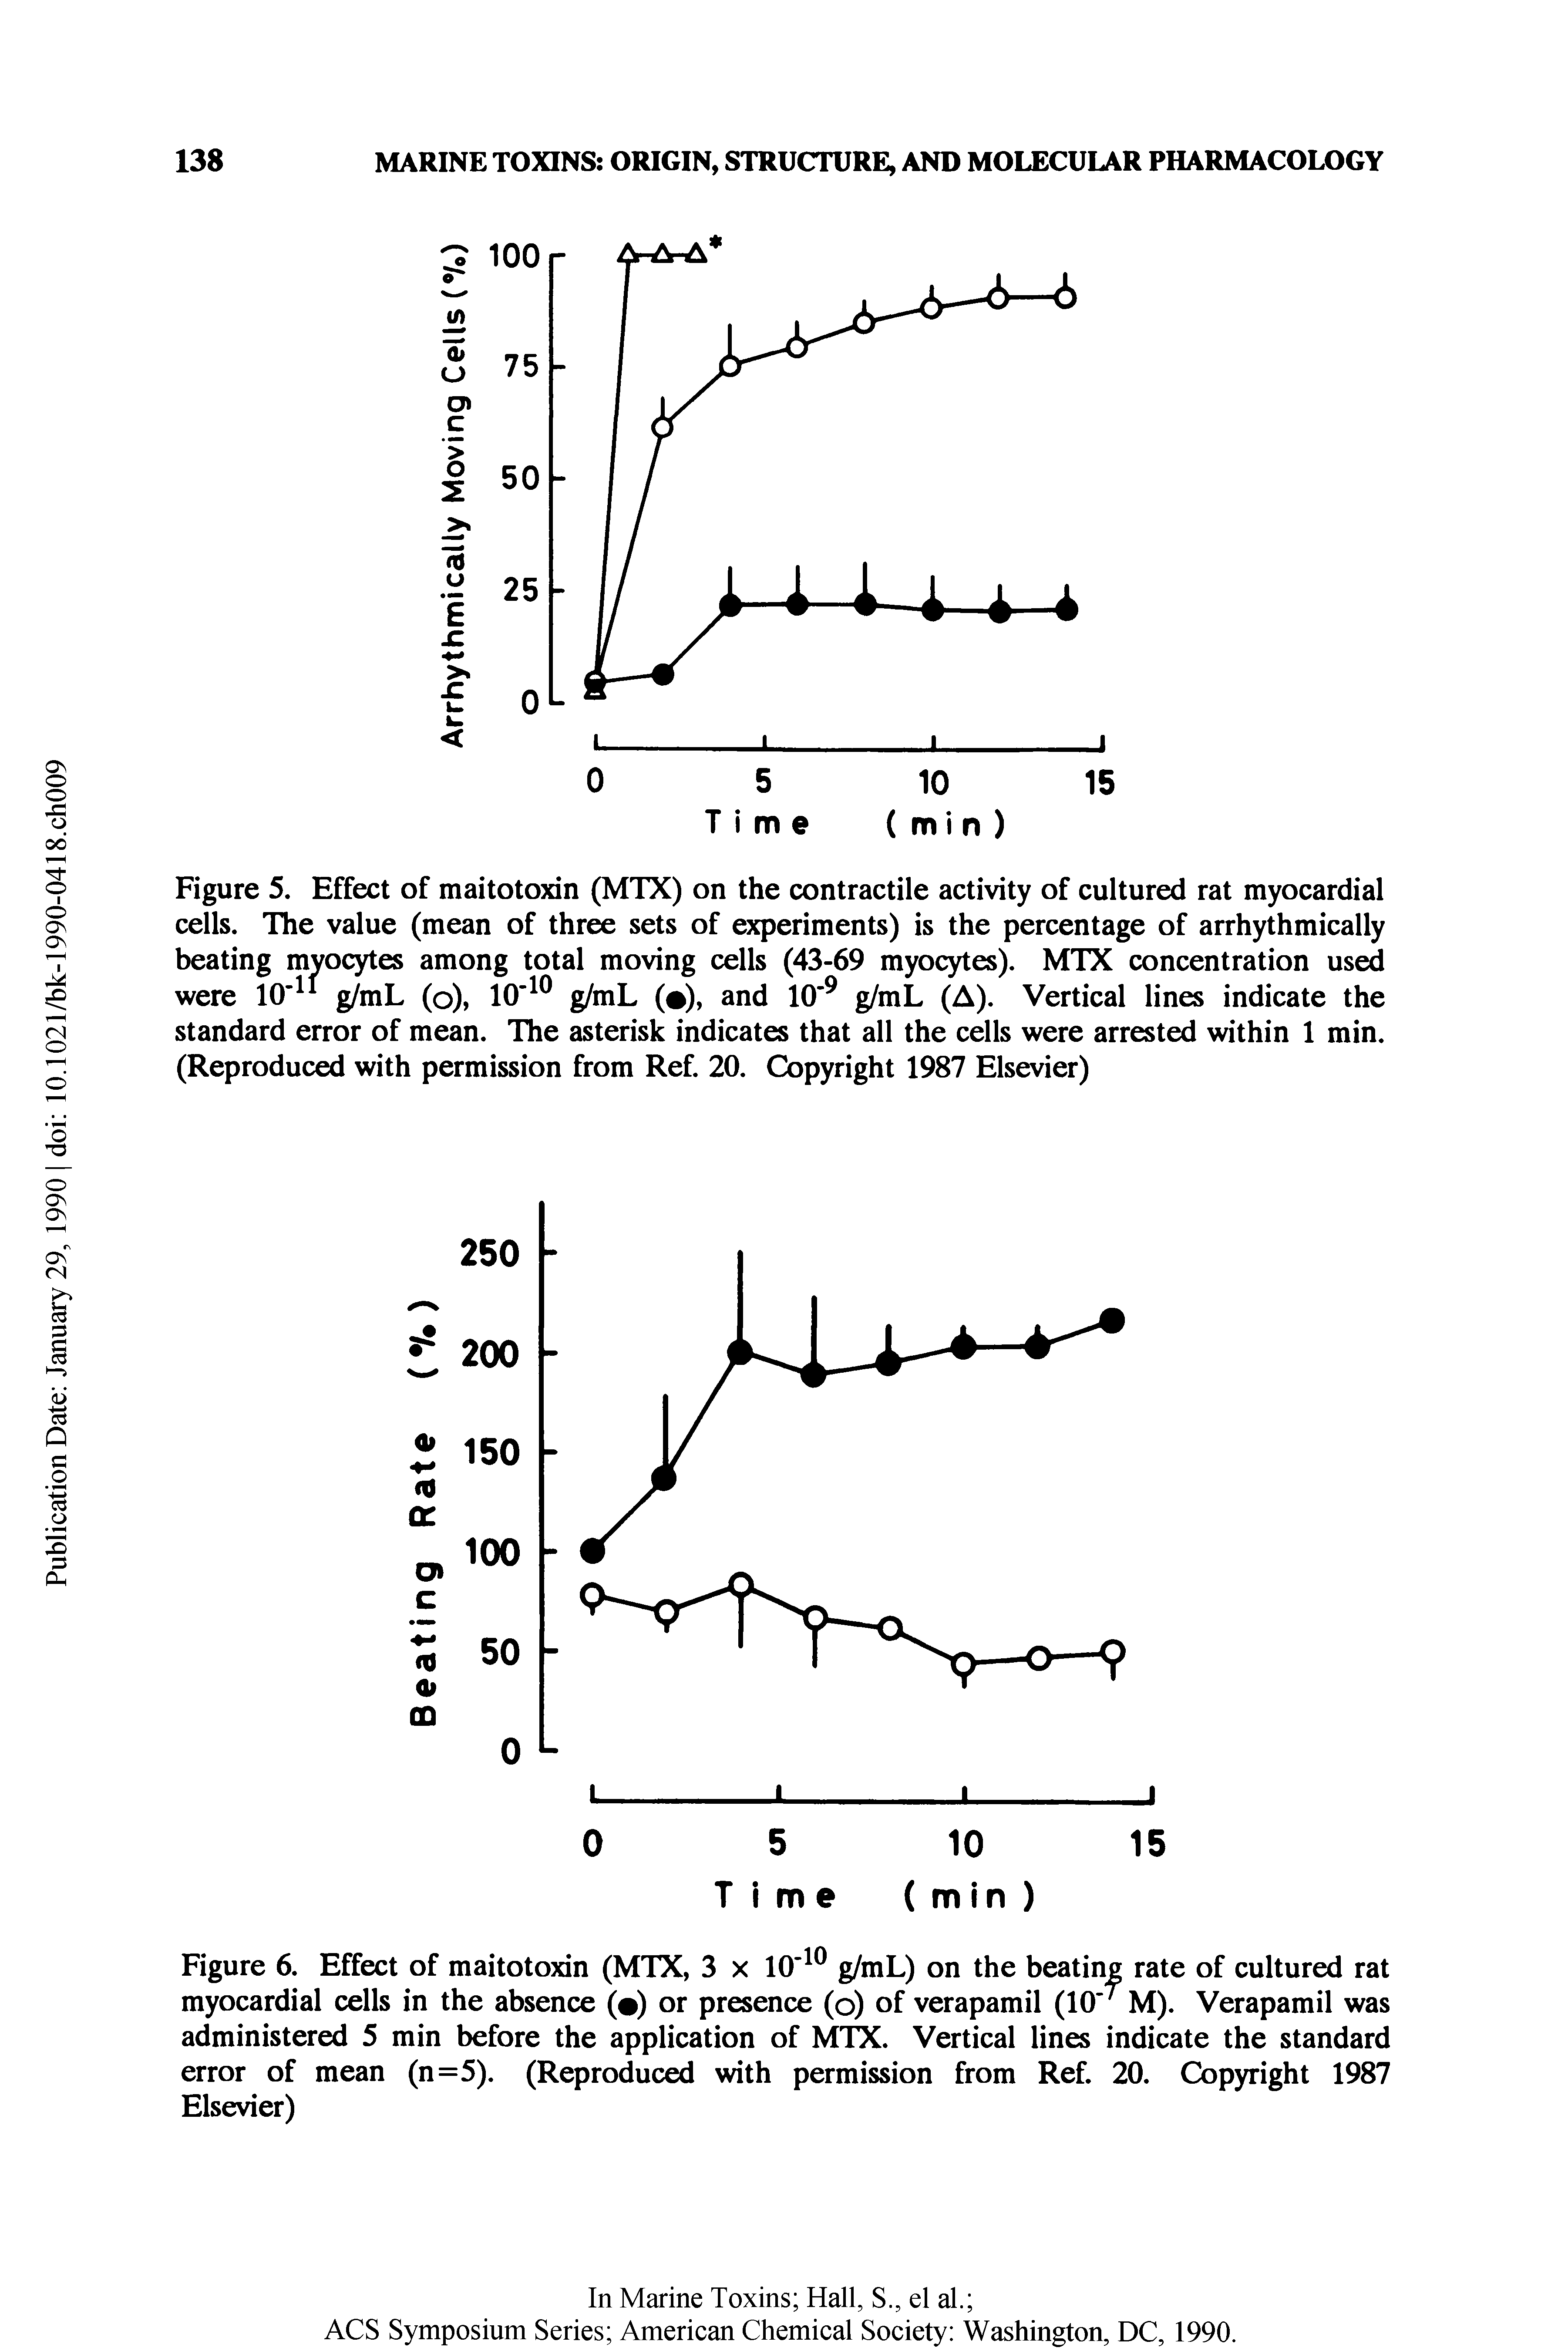 Figure 6. Effect of maitotoxin (MTX, 3 x 10 g/mL) on the beating rate of cultured rat myocardial cells in the absence ( ) or presence (o) of verapamil (10 M). Verapamil was administered 5 min before the application of MTX, Vertical lines indicate the standard error of mean (n=5). (Reproduced with permission from Ref. 20. Copyright 1987 Elsevier)...